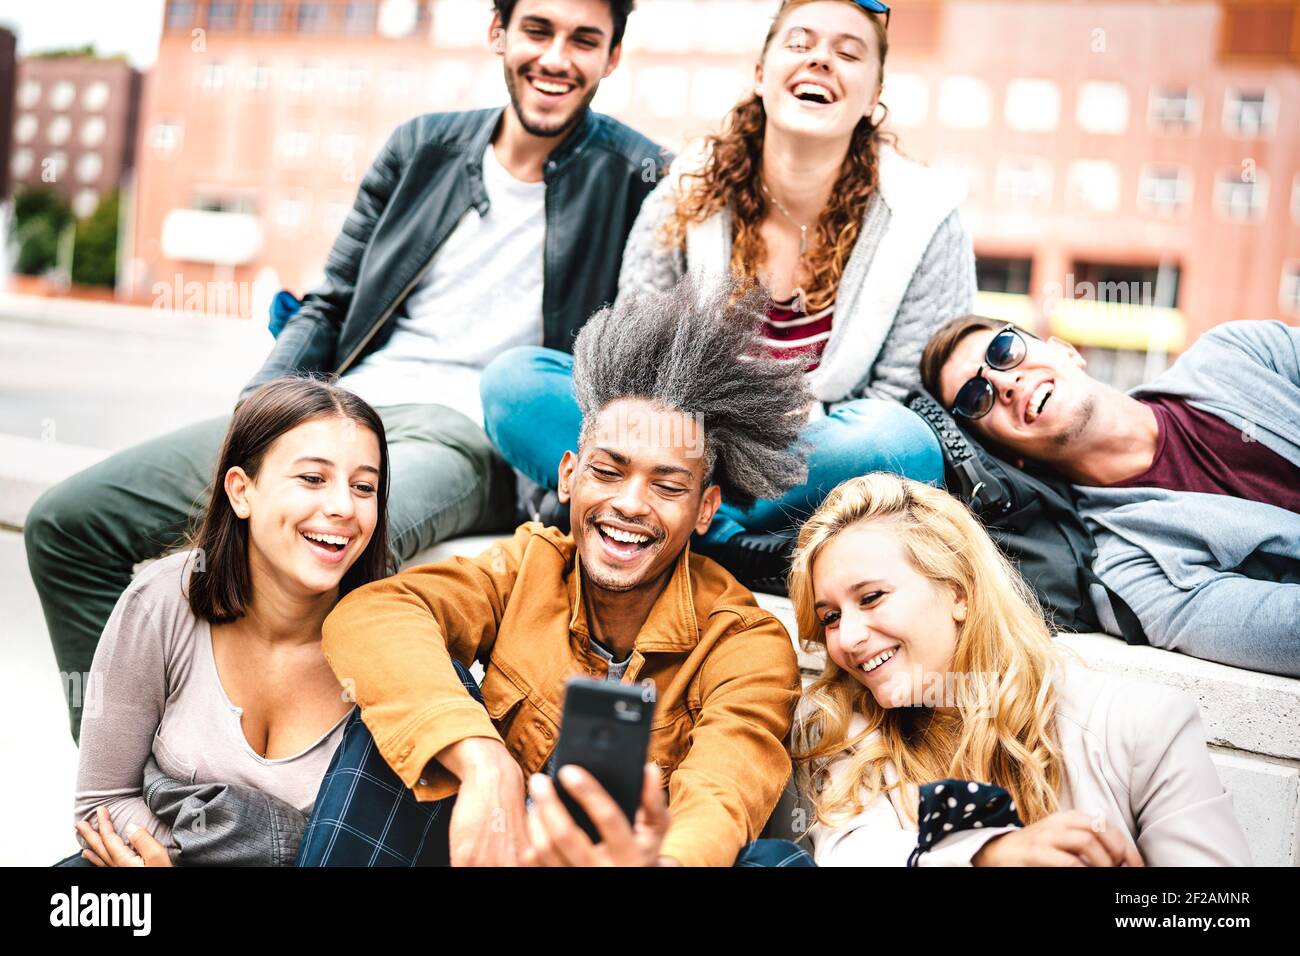 Happy milenial people having fun sharing photo on mobile phone after lockdown reopening - Joyful concept about guys and girls spending time together Stock Photo